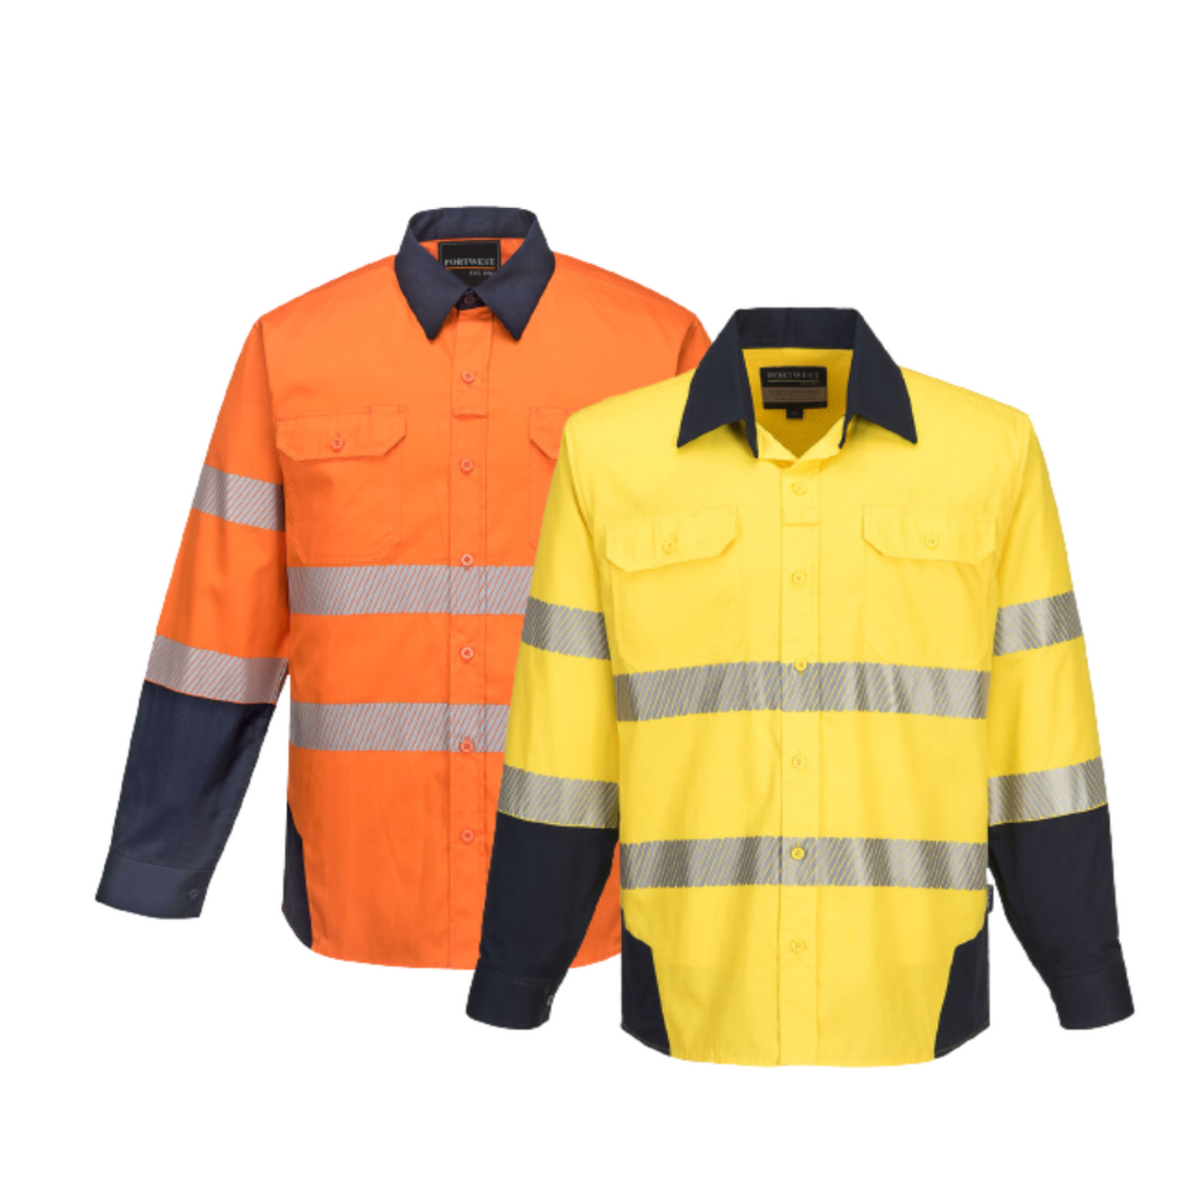 Portwest PW3 Shirt 2 Tone Lightweight Reflective Tape Work Safety PW372-Collins Clothing Co